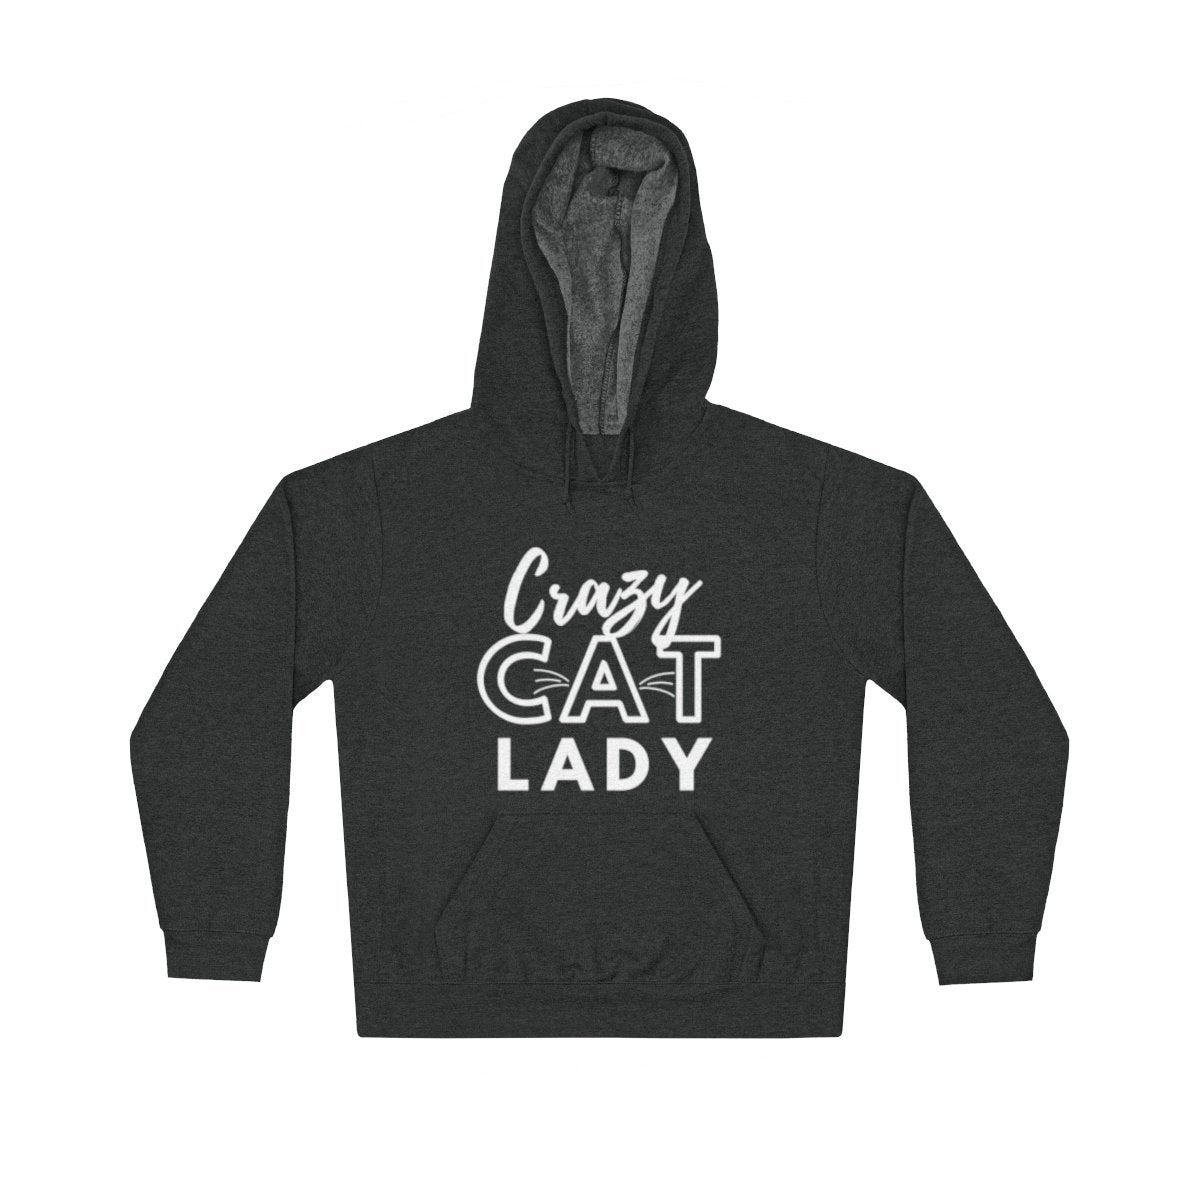 Gifts for Crazy Cat Lady, Black Crazy Cat Lady Sweatshirt Made from a Soft Cotton Blend